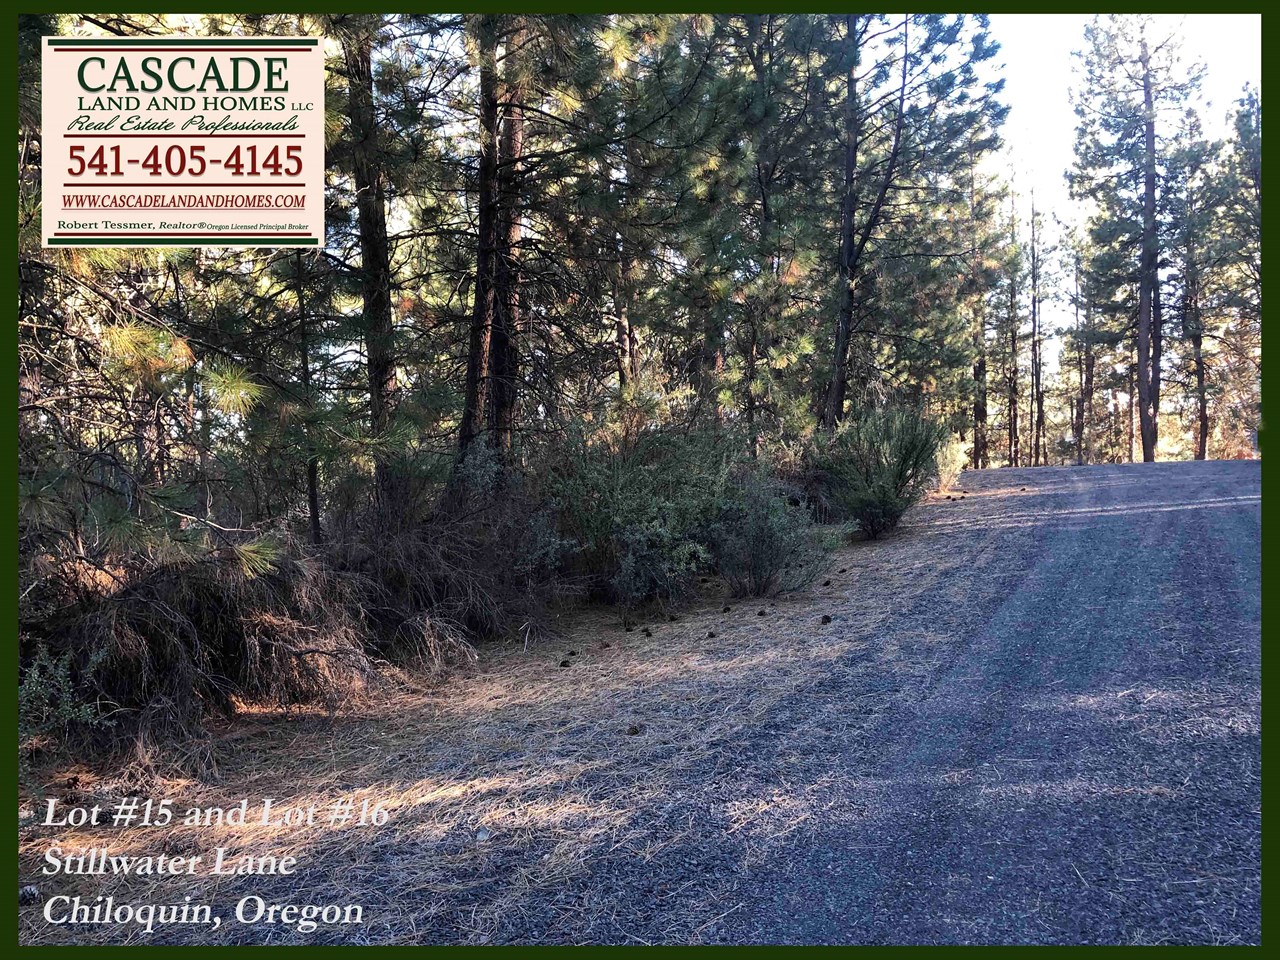 the roads to the property are very well maintained compacted dirt, cinders, and gravel. we had no trouble at all accessing the property. it's very easy to find, the roads are well marked, just look for our signs!